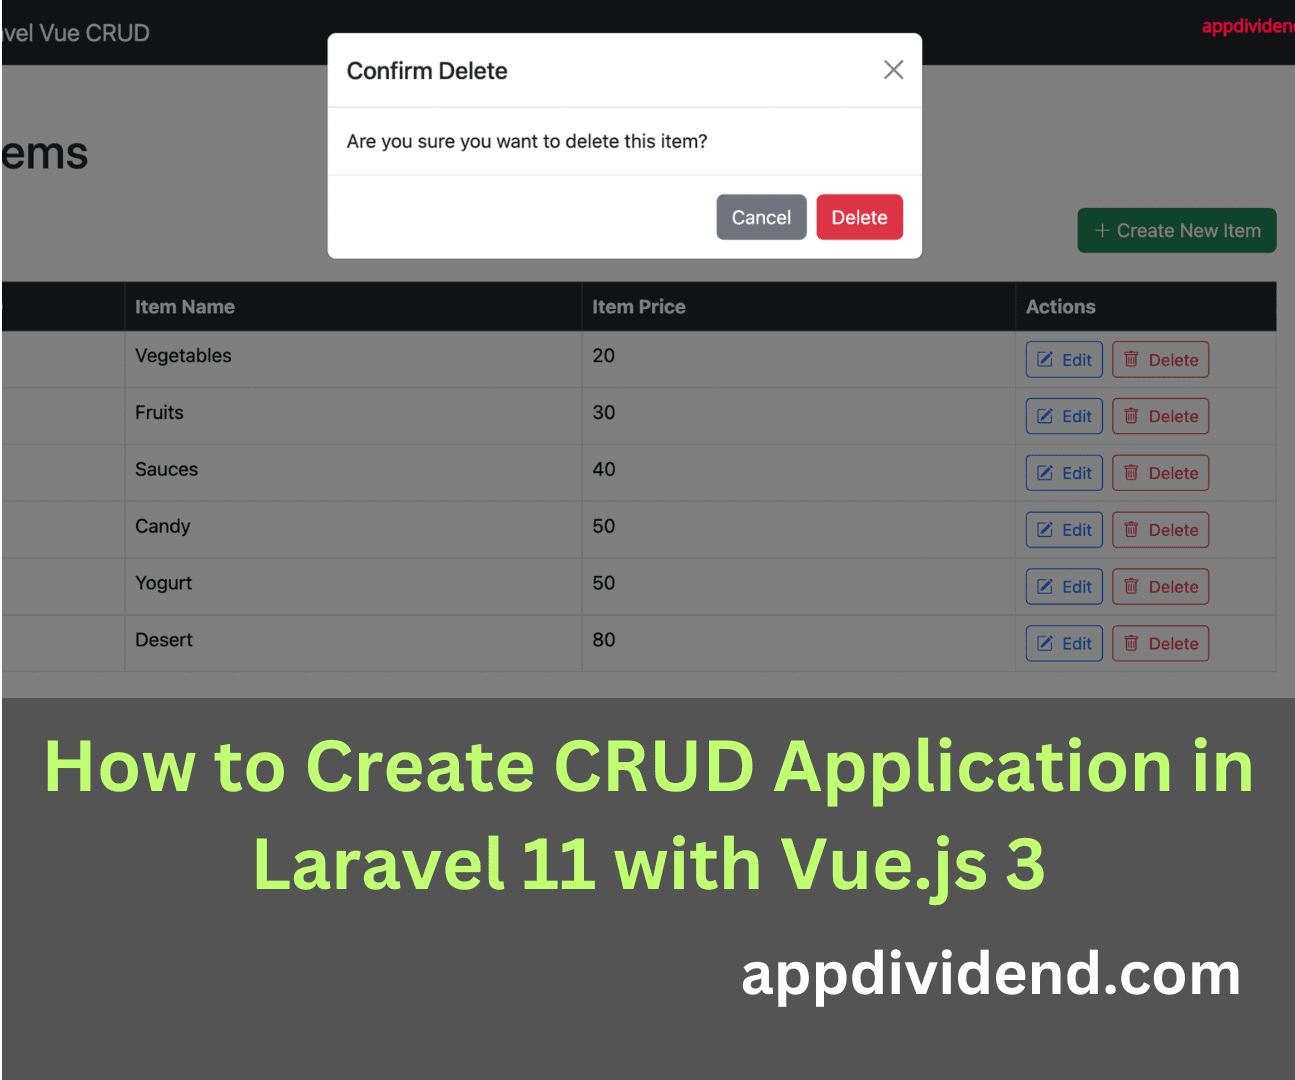 How to Create a Chart using Chart.js in Laravel 11 and Vue.js 3